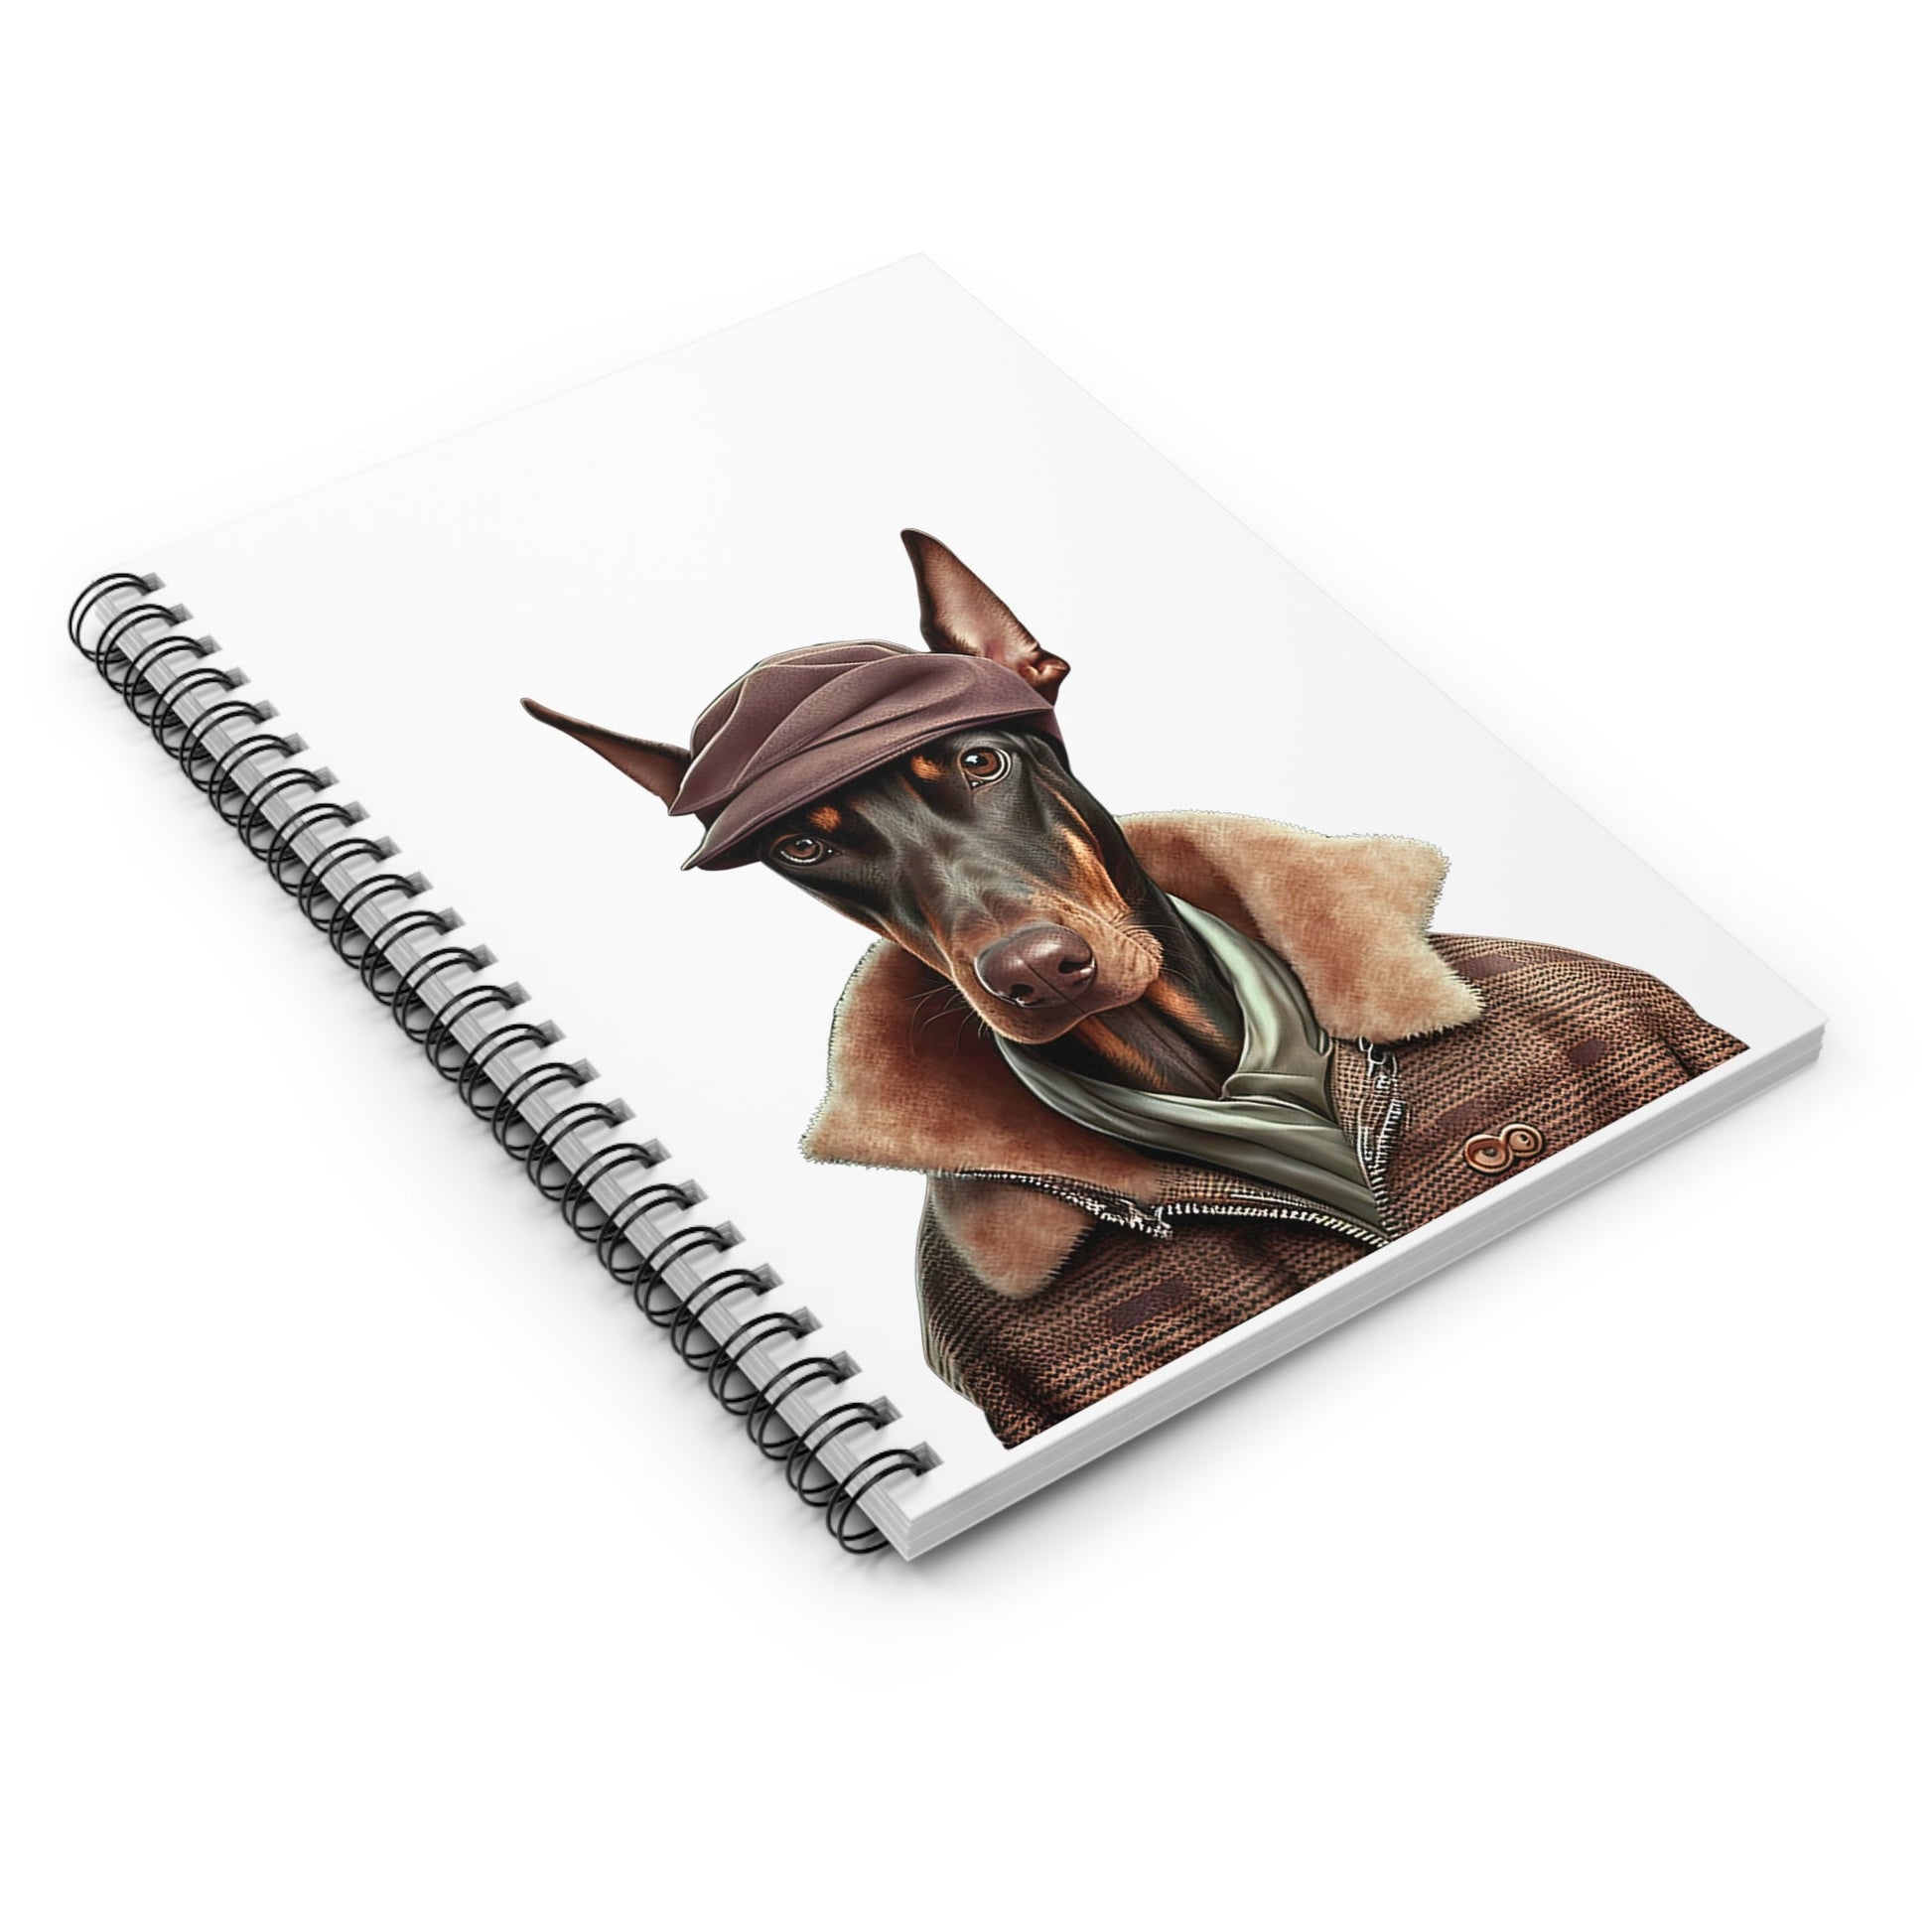 HORACE : Spiral Notebook - Ruled Line - Shaggy Chic